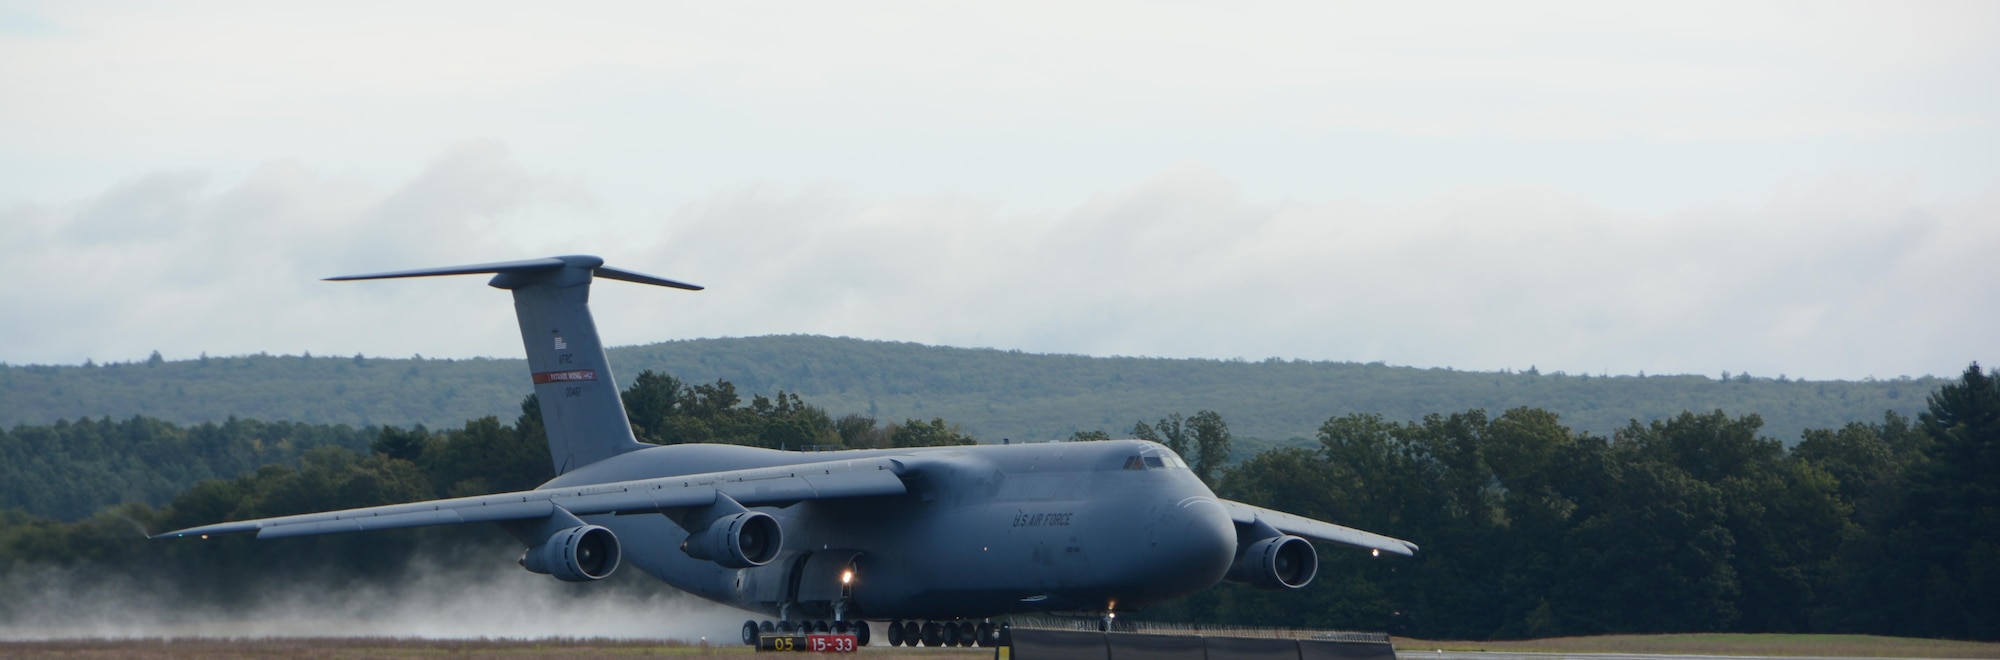 C-5A Galaxy 70-0461 departs from the runway September 7, 2017, at Westover Air Reserve Base, Mass. 0461 is the last C-5A in the Air Force and is destined for the boneyard at Davis-Monthan Air Force Base, Ariz. where it is set to retire. (U.S. Air Force photo by Airman Hanna N. Smith)